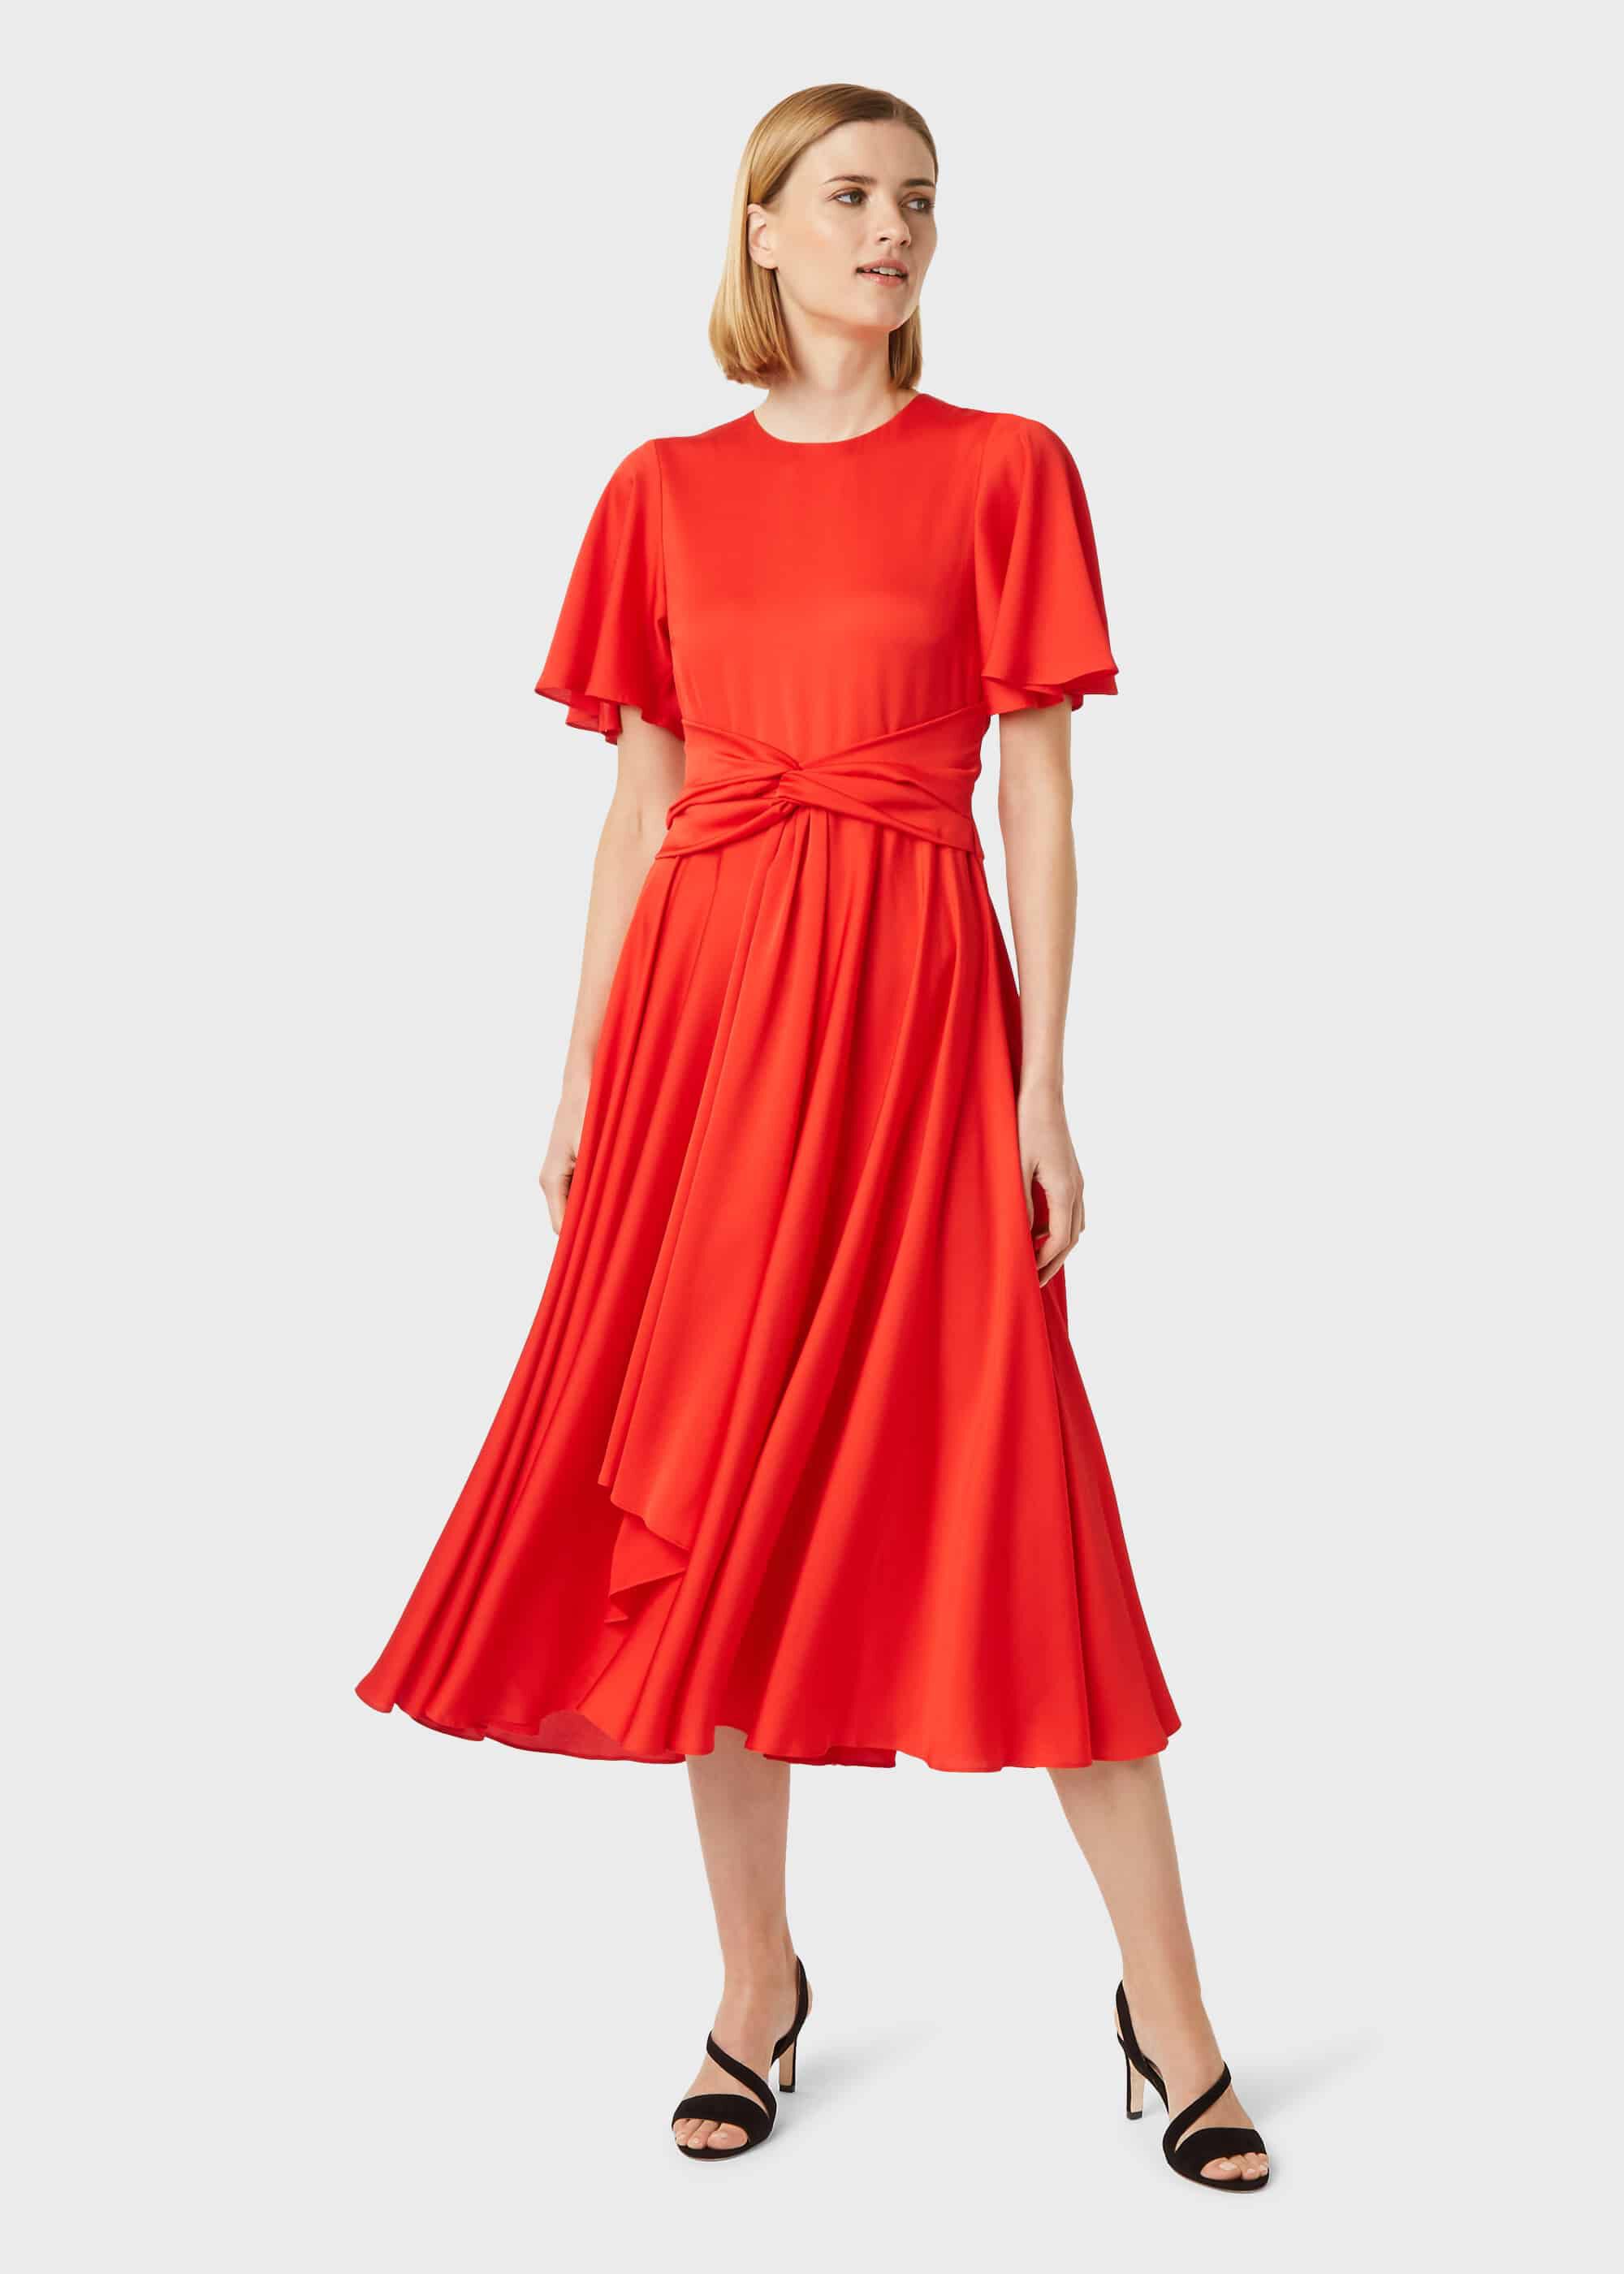 red satin fit and flare dress